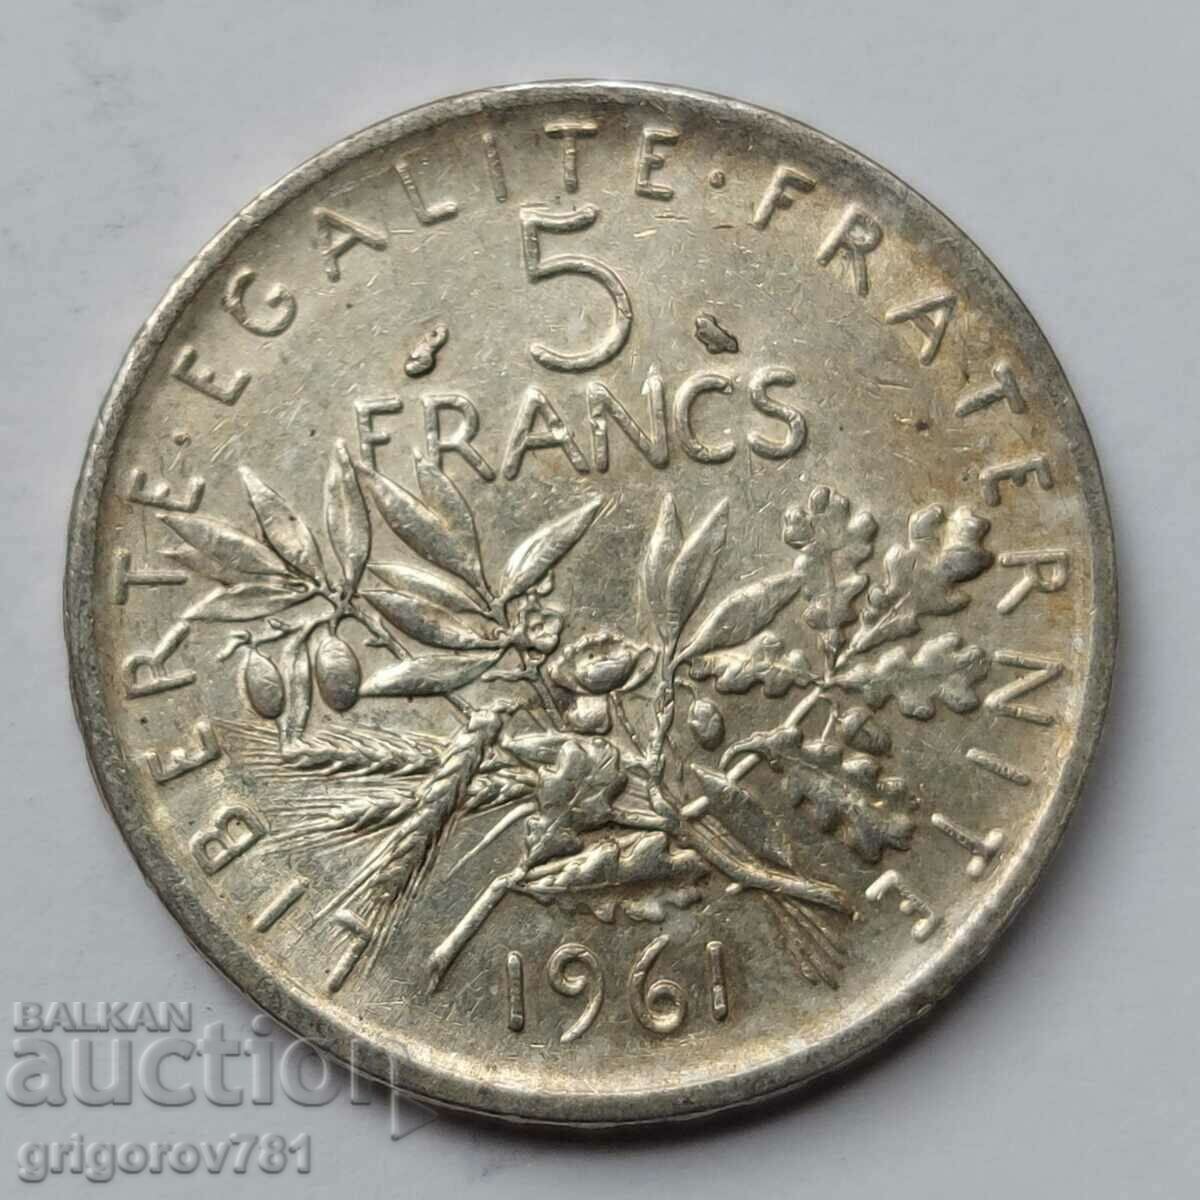 5 Francs Silver France 1961 - Silver Coin #3